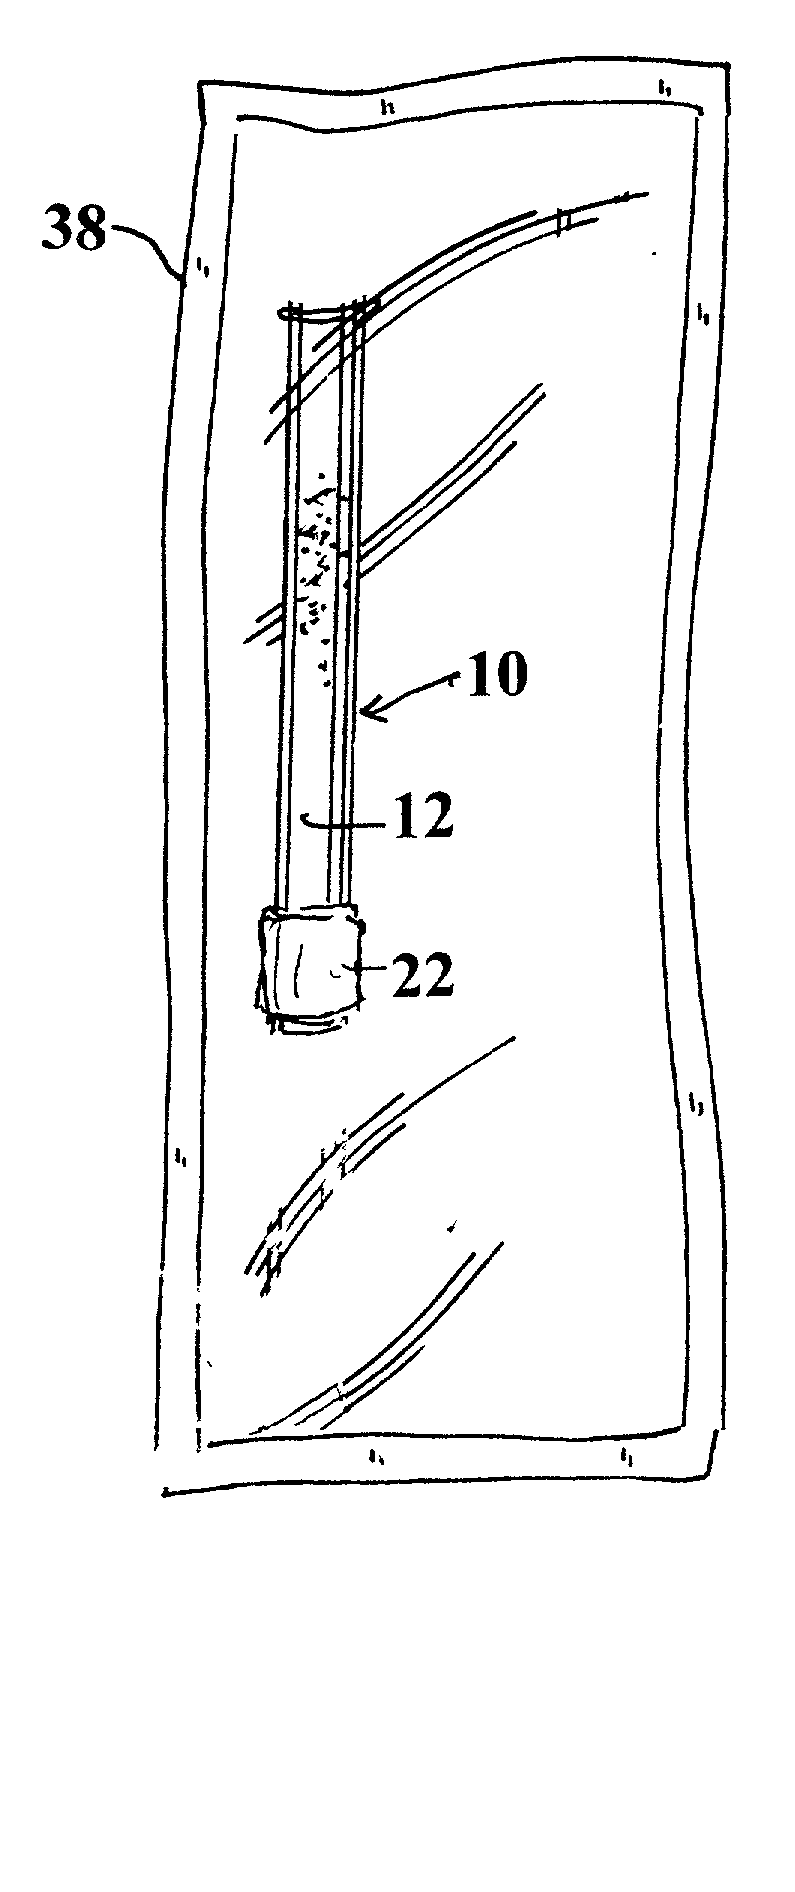 Additive tube for enteral nutrition apparatus